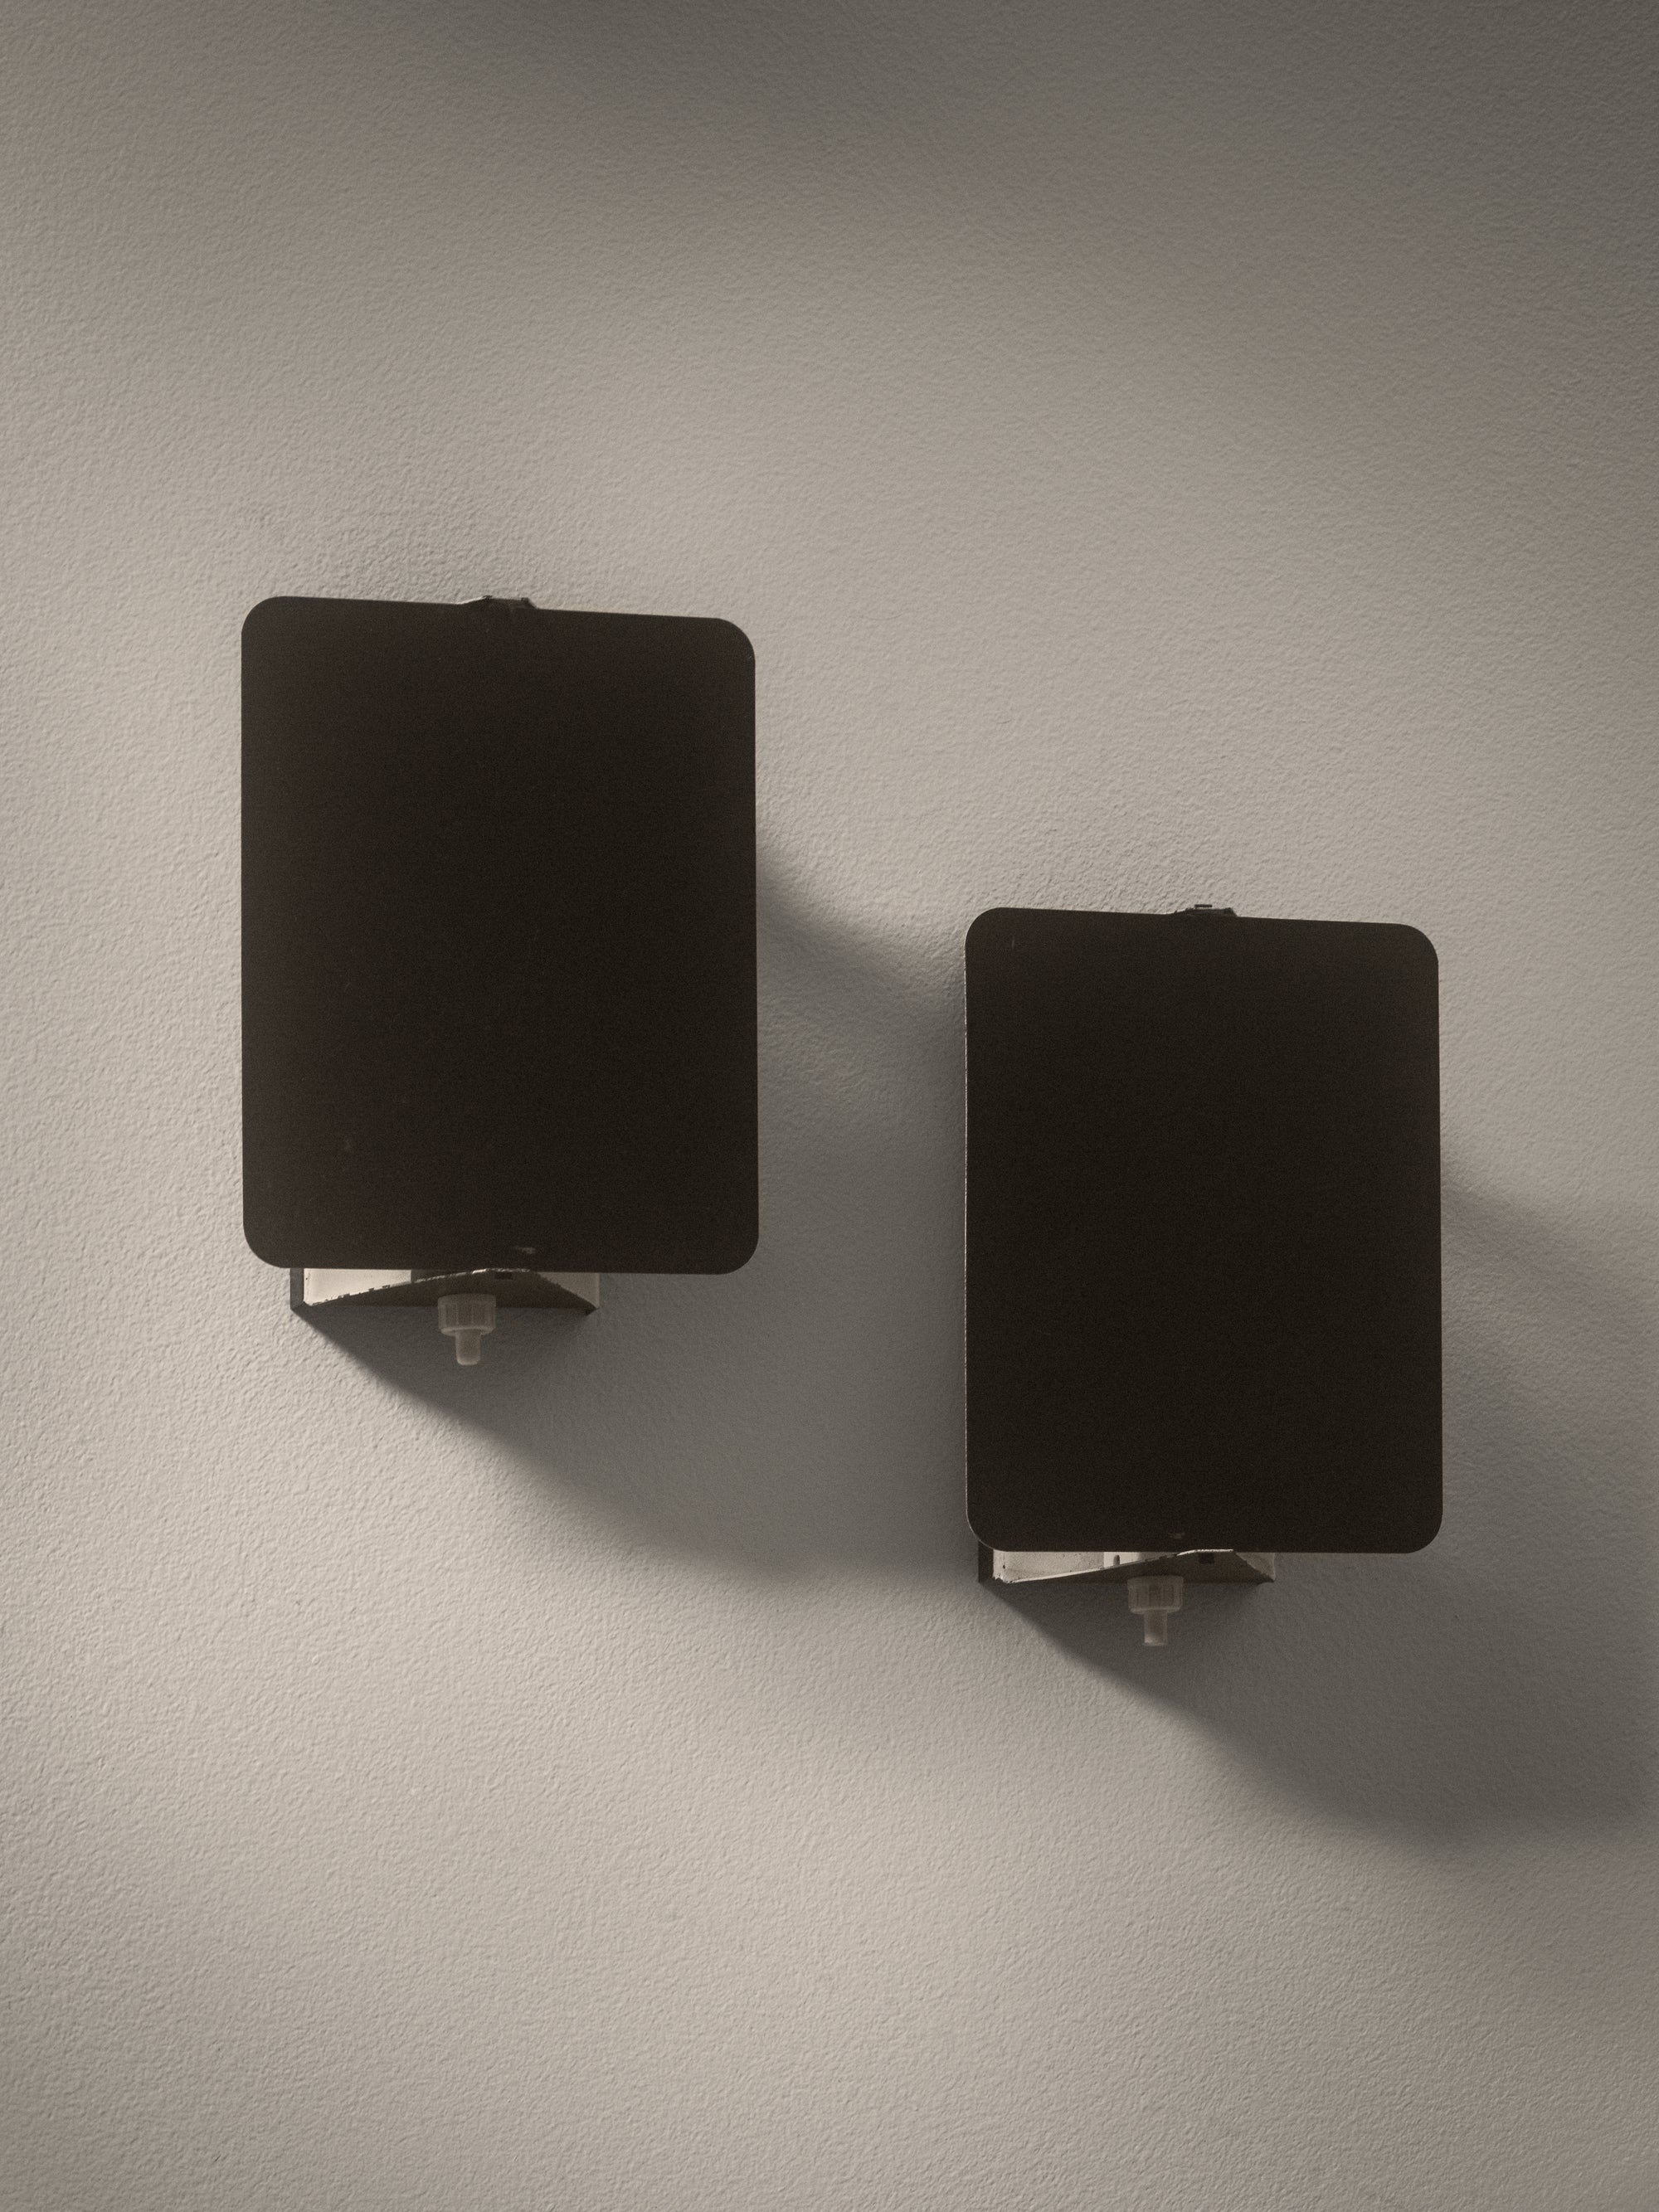 PAIR OF 'CP1' WALL LIGHTS